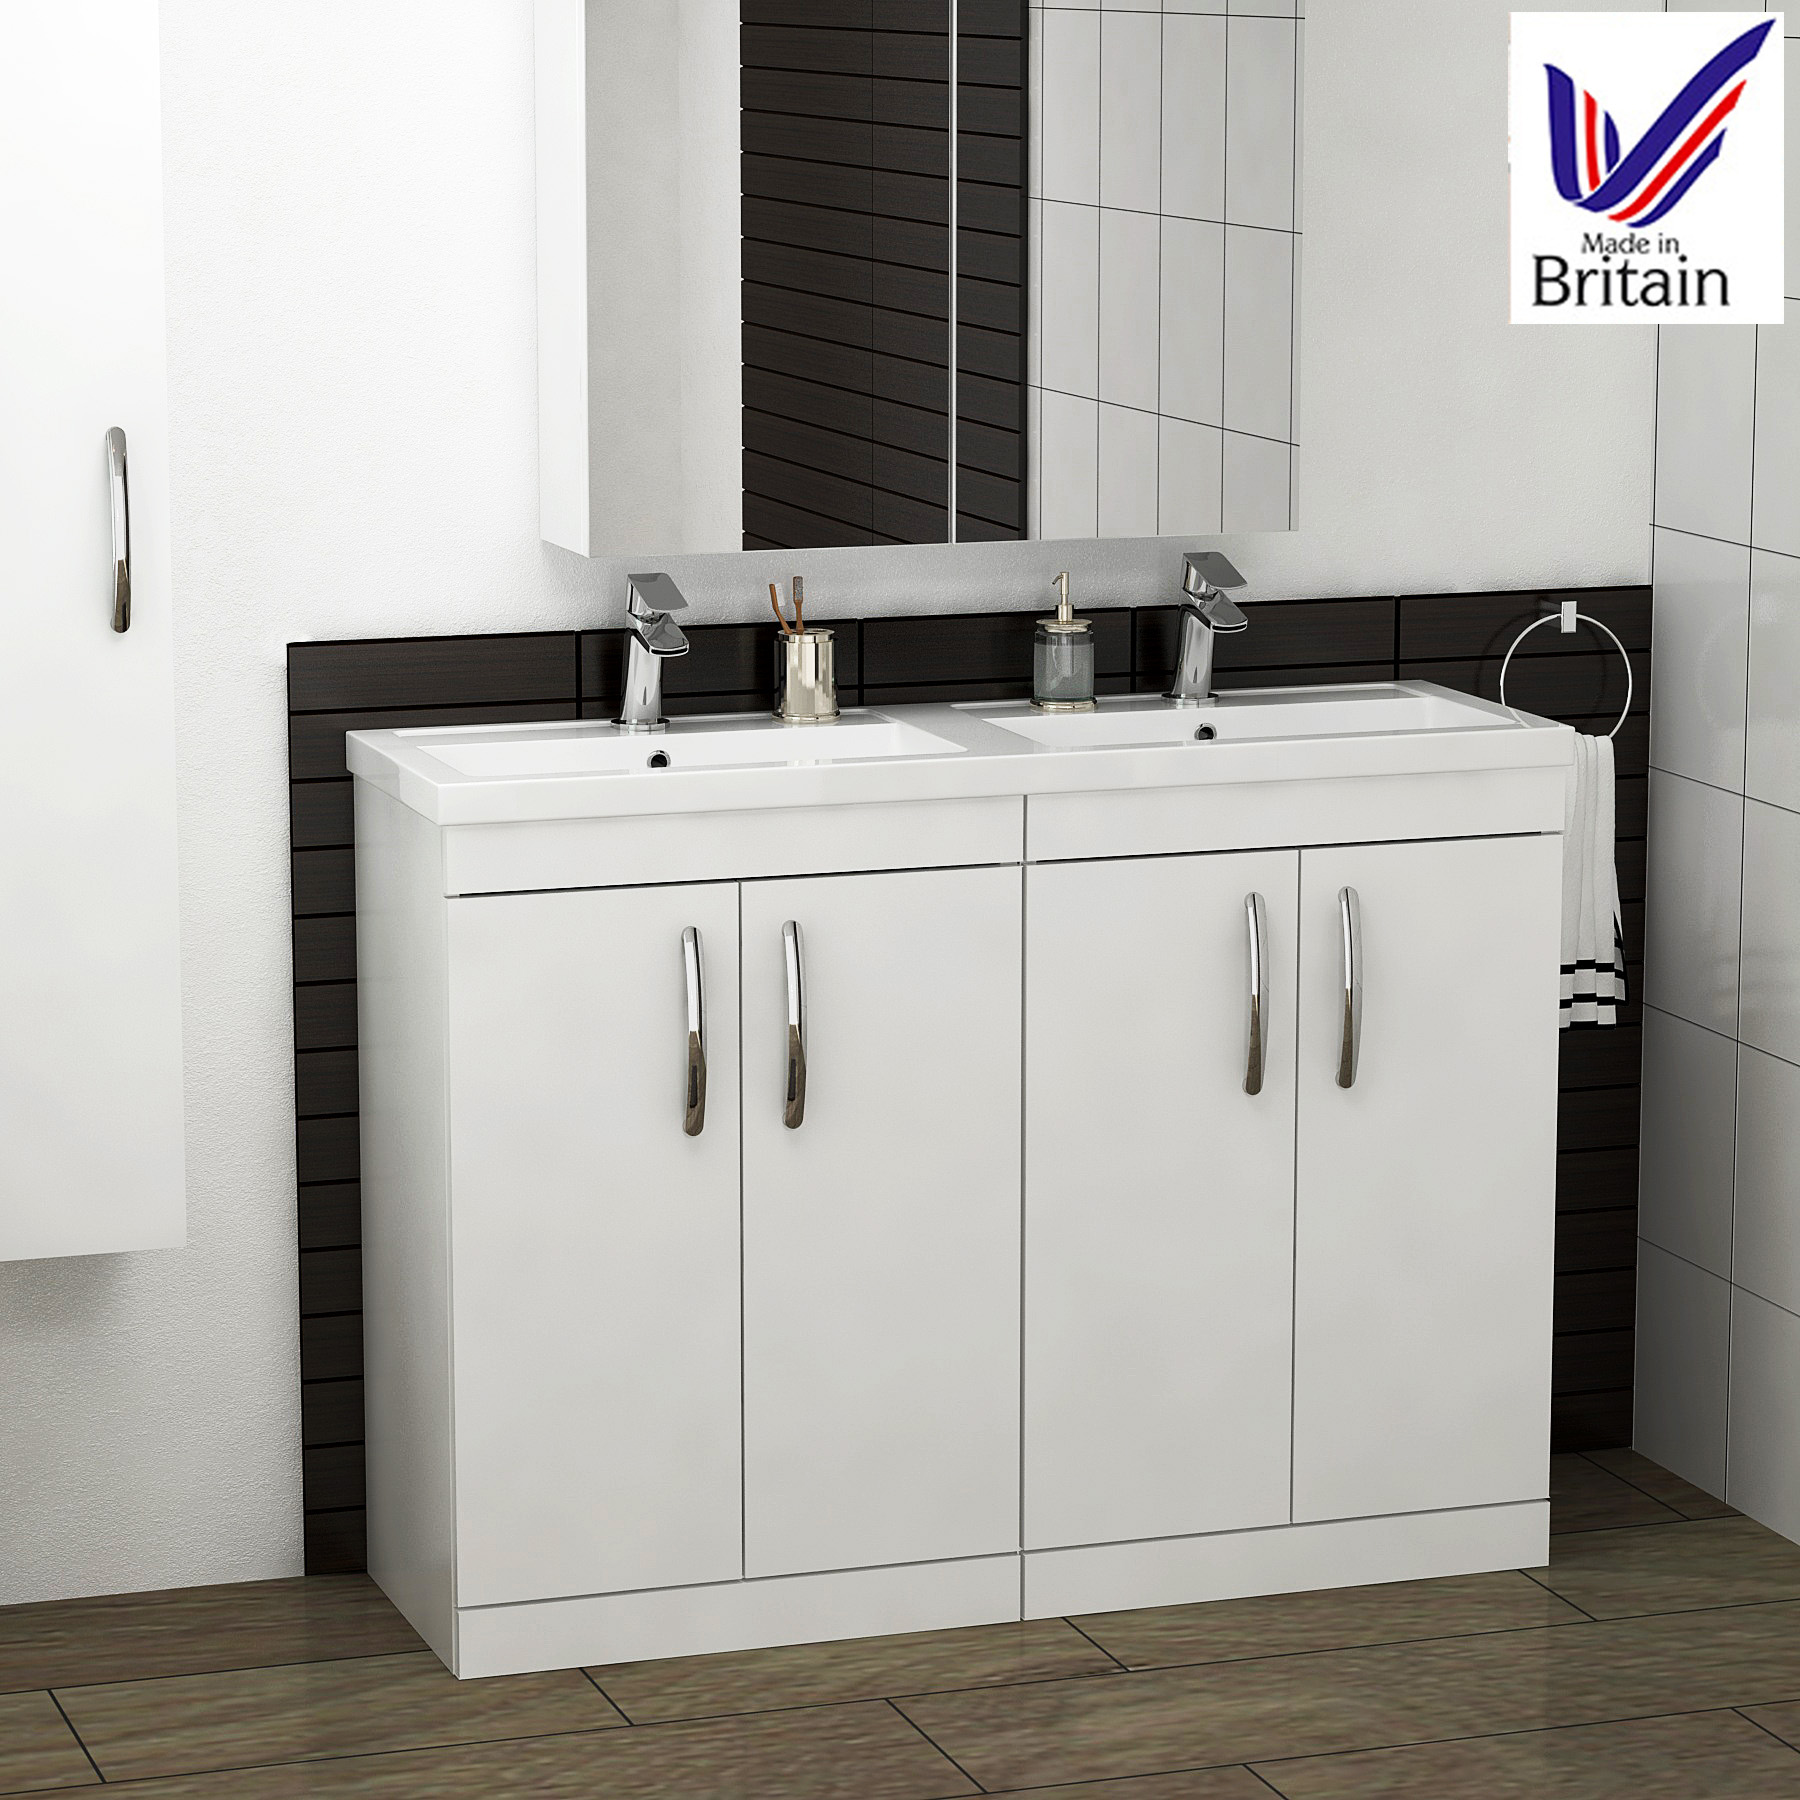 Details About 1200mm Floor Standing Vanity Unit Gloss White Double Basin Sink Cabinet 4 Doors